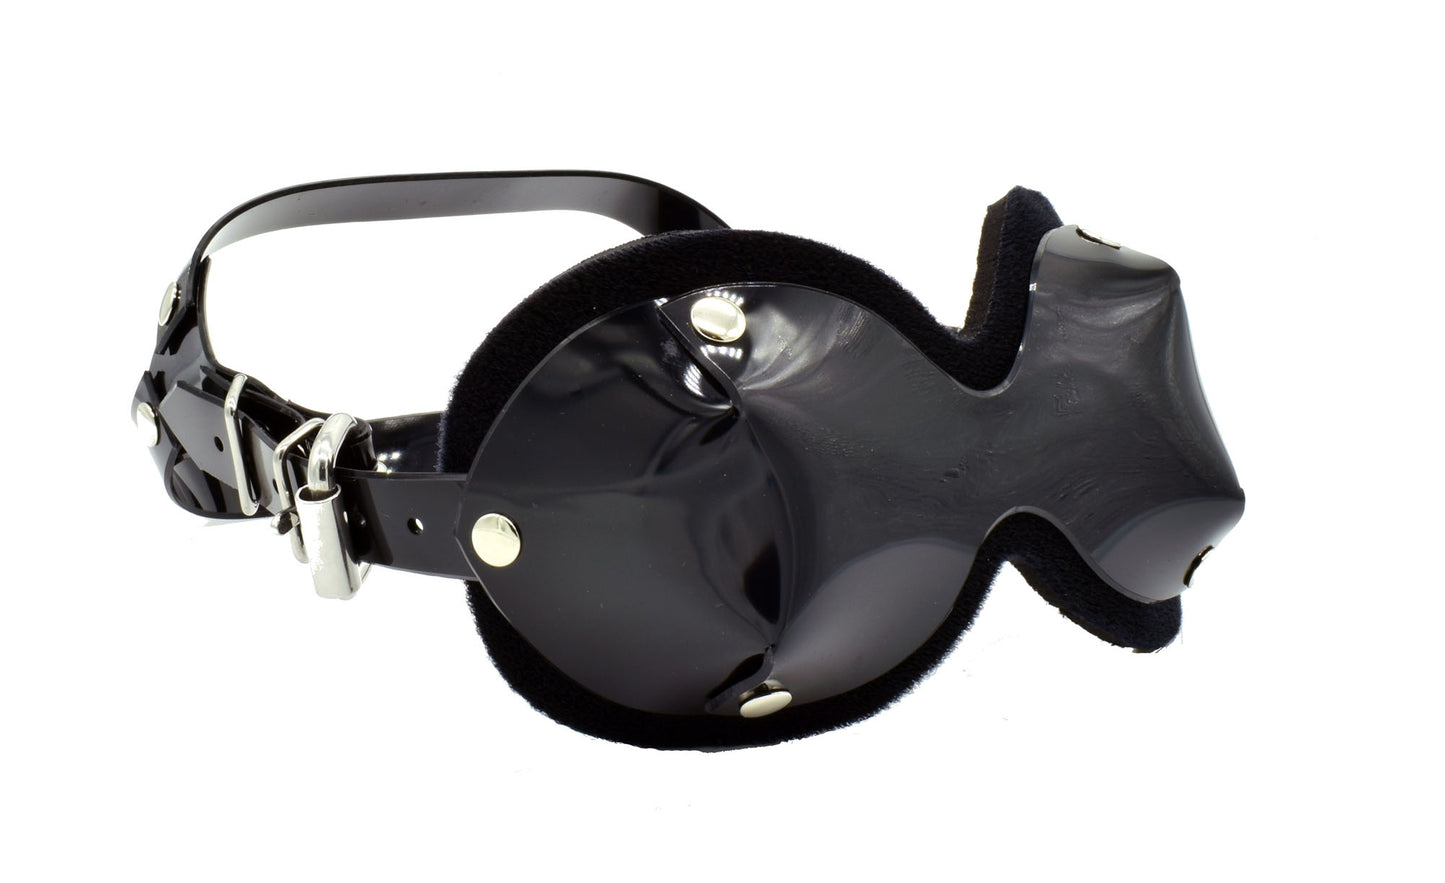 The PVC Ultimate Blindfold, front and right side view.